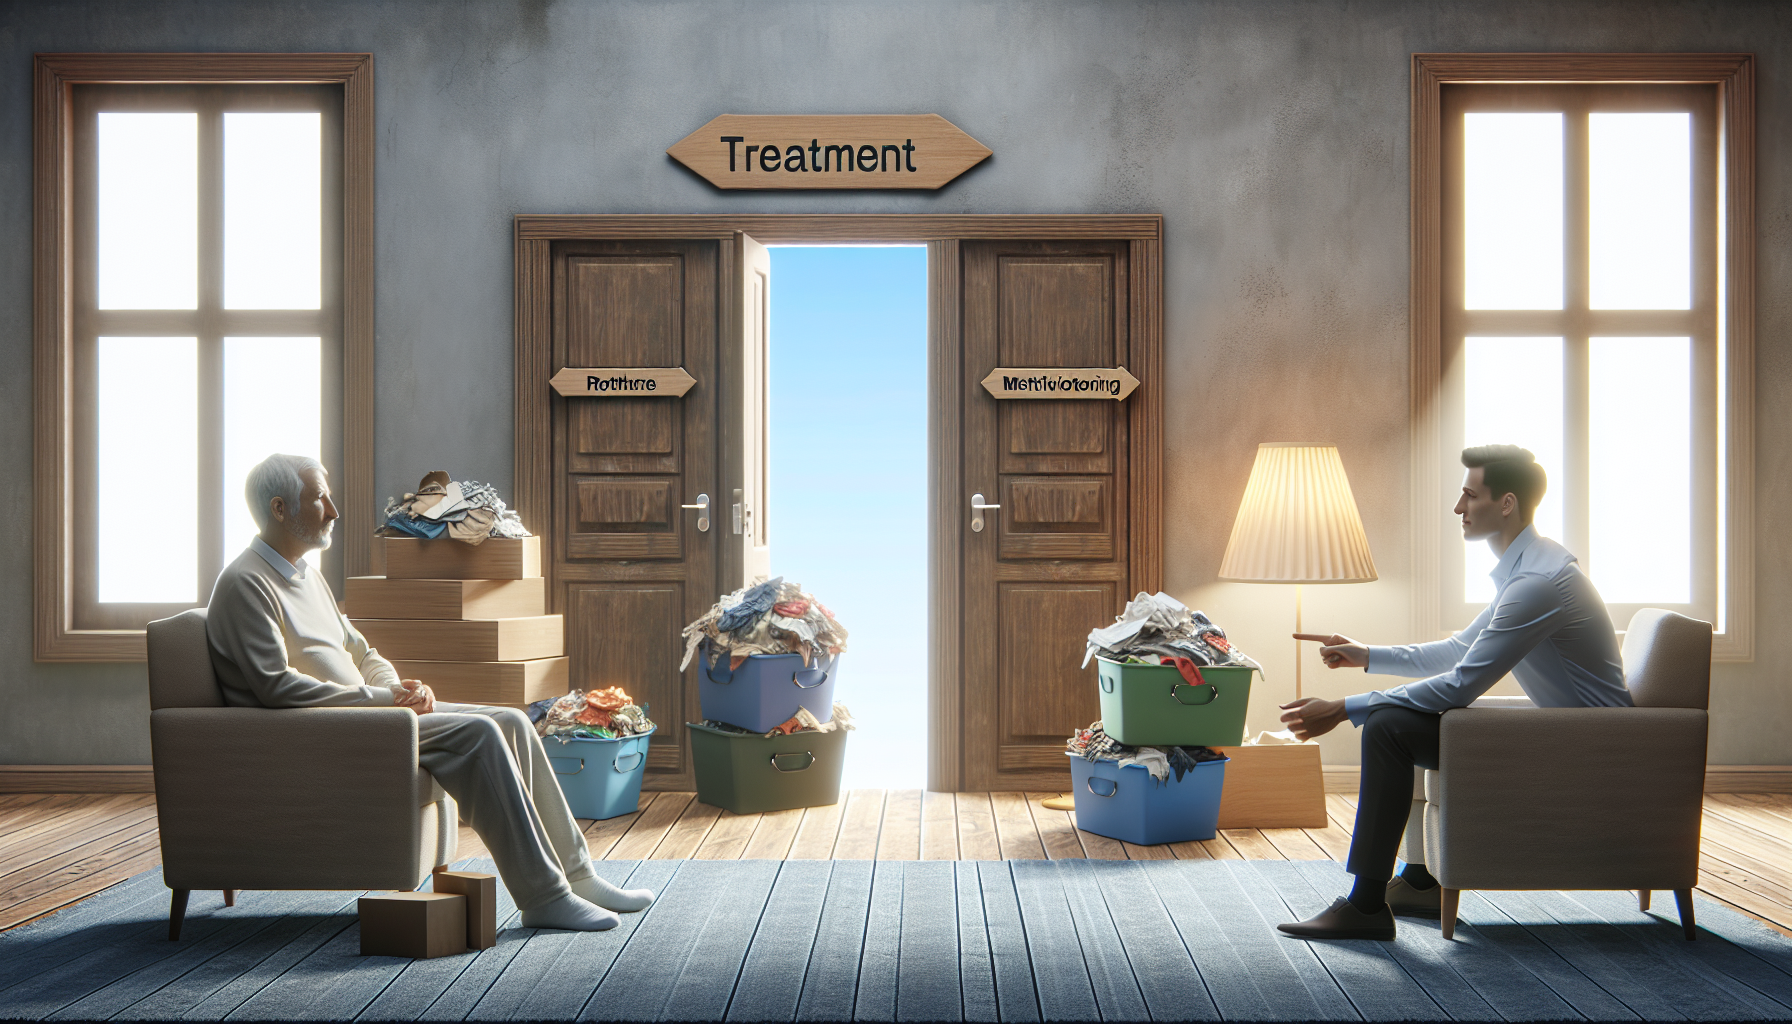 Illustration of a therapy session for hoarding disorder treatment